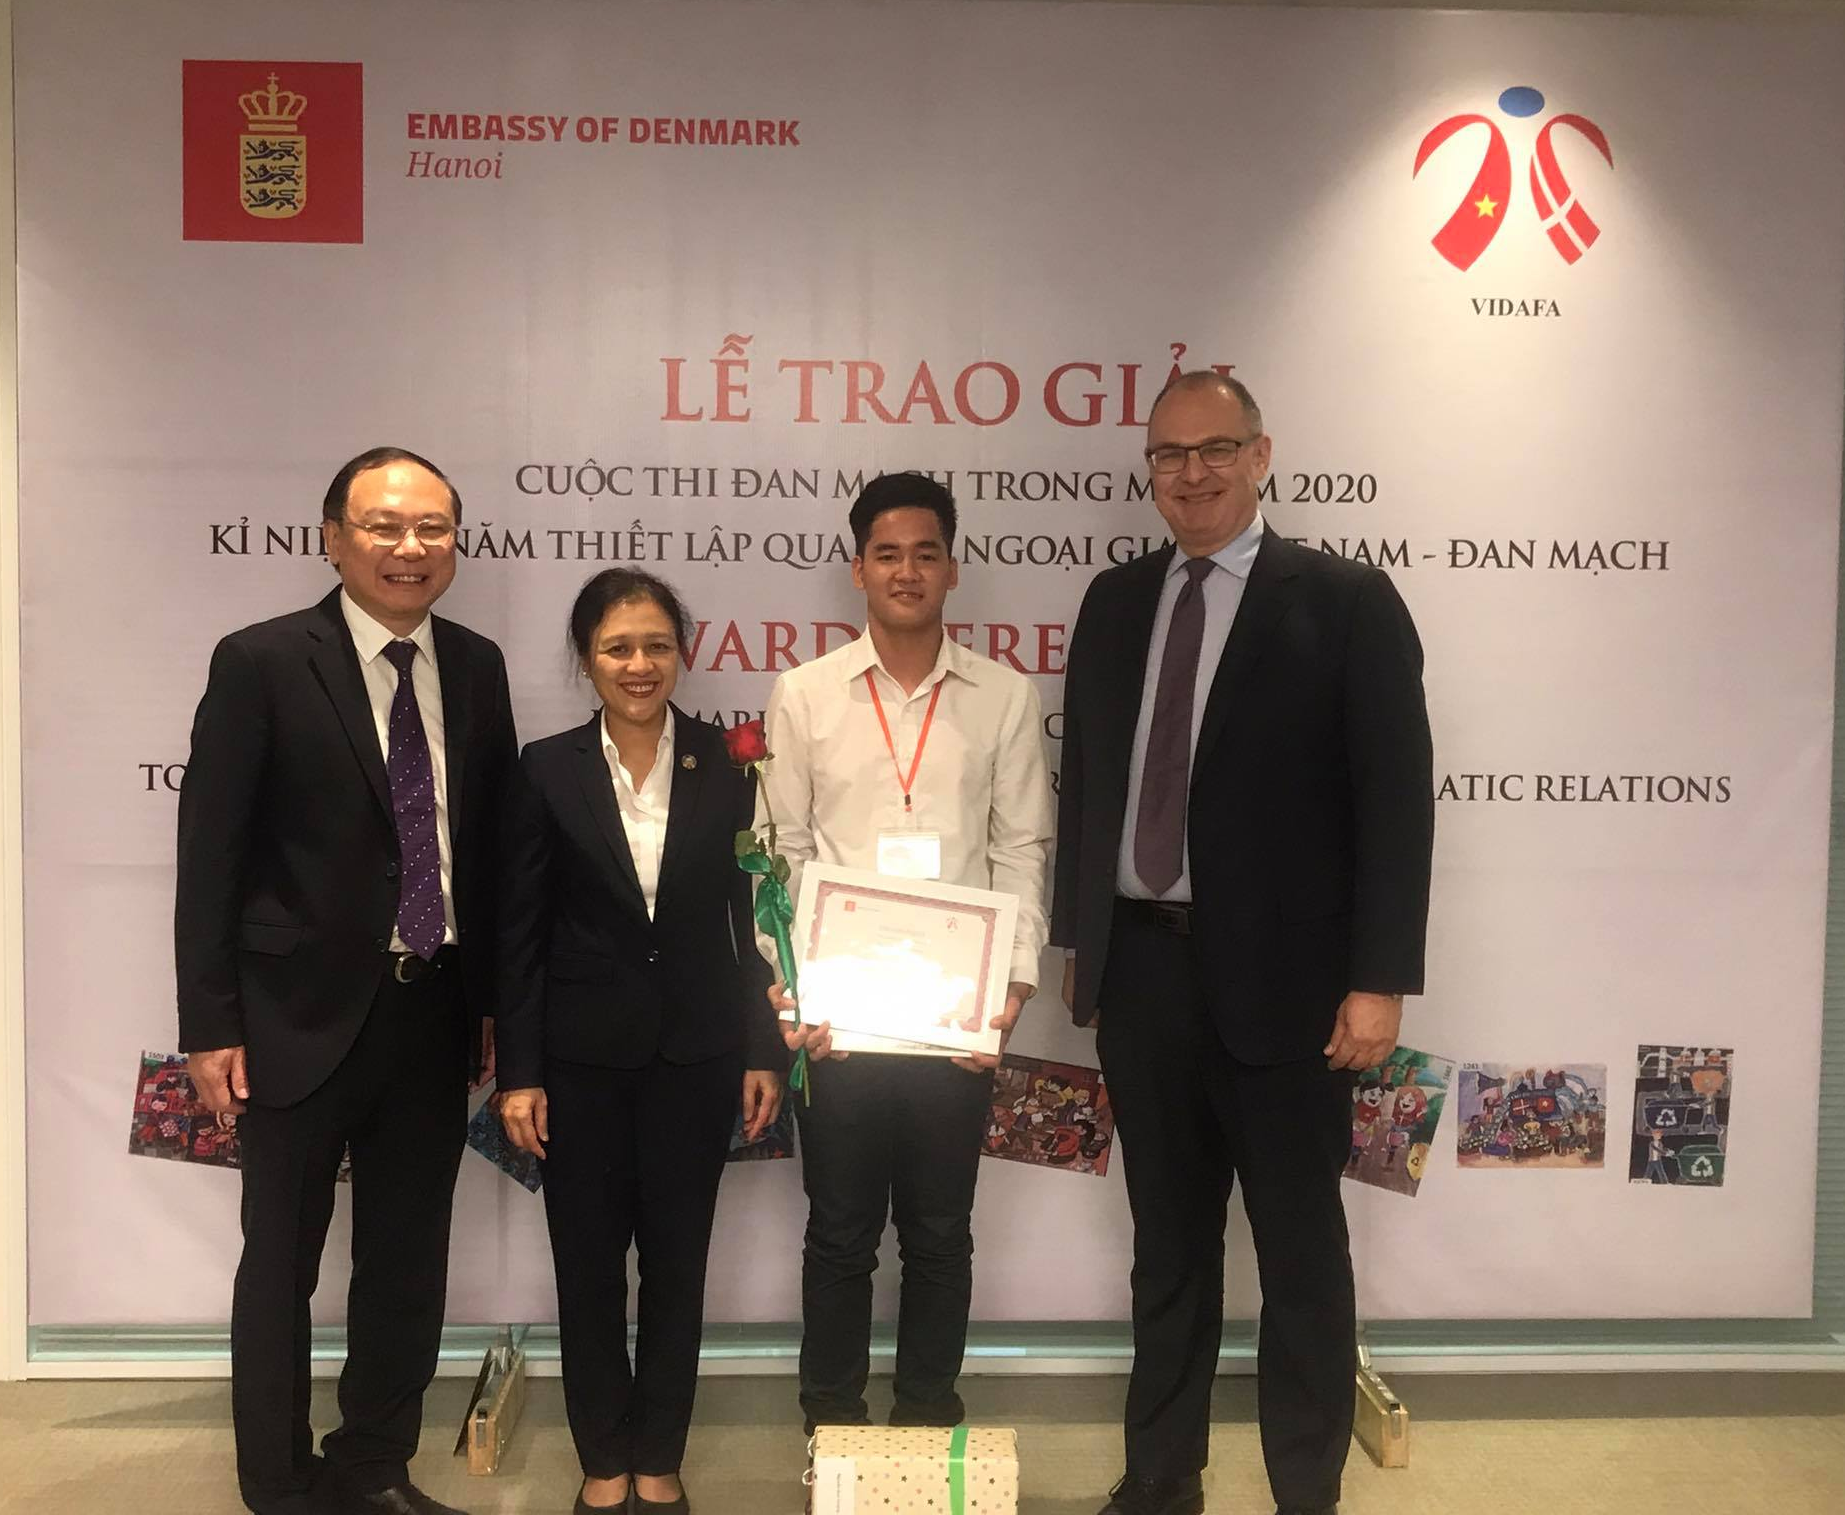 Successful "Denmark in Your Eyes 2020" contest in Vietnam announcing winners